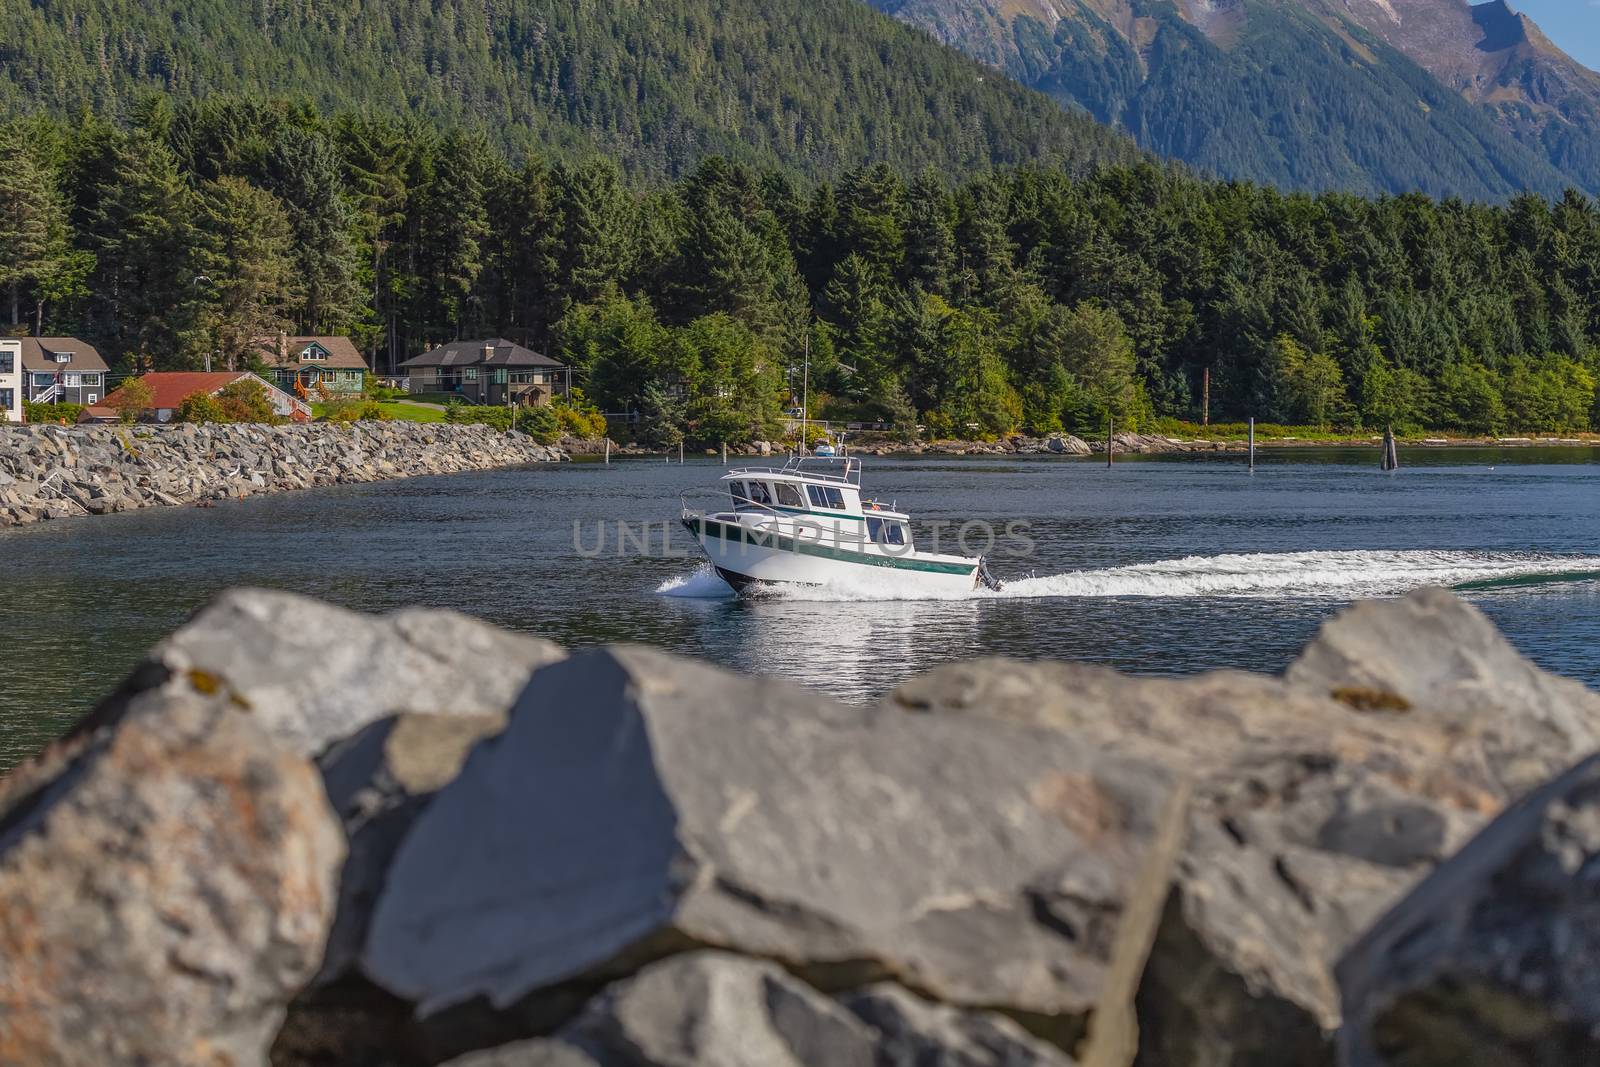 Fishing speedboat sailing fast in harbor. Long water trace behind it. Rocks in soft focus in the foreground. Houses, mountains, and forest in the back